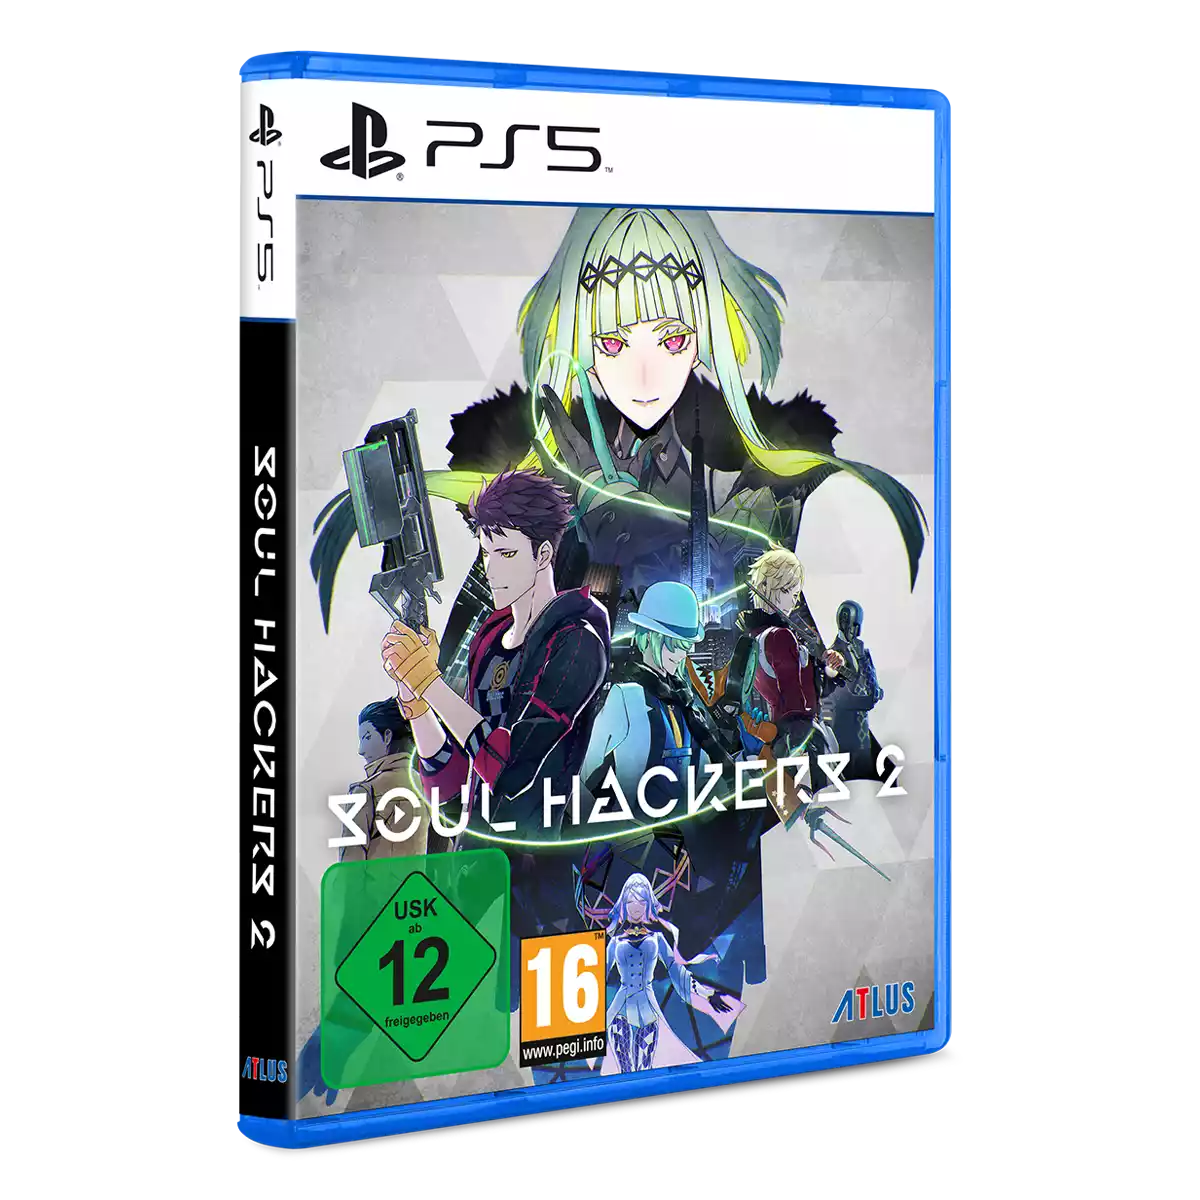 Soul Hackers 2 - PS4 & PS5 Games